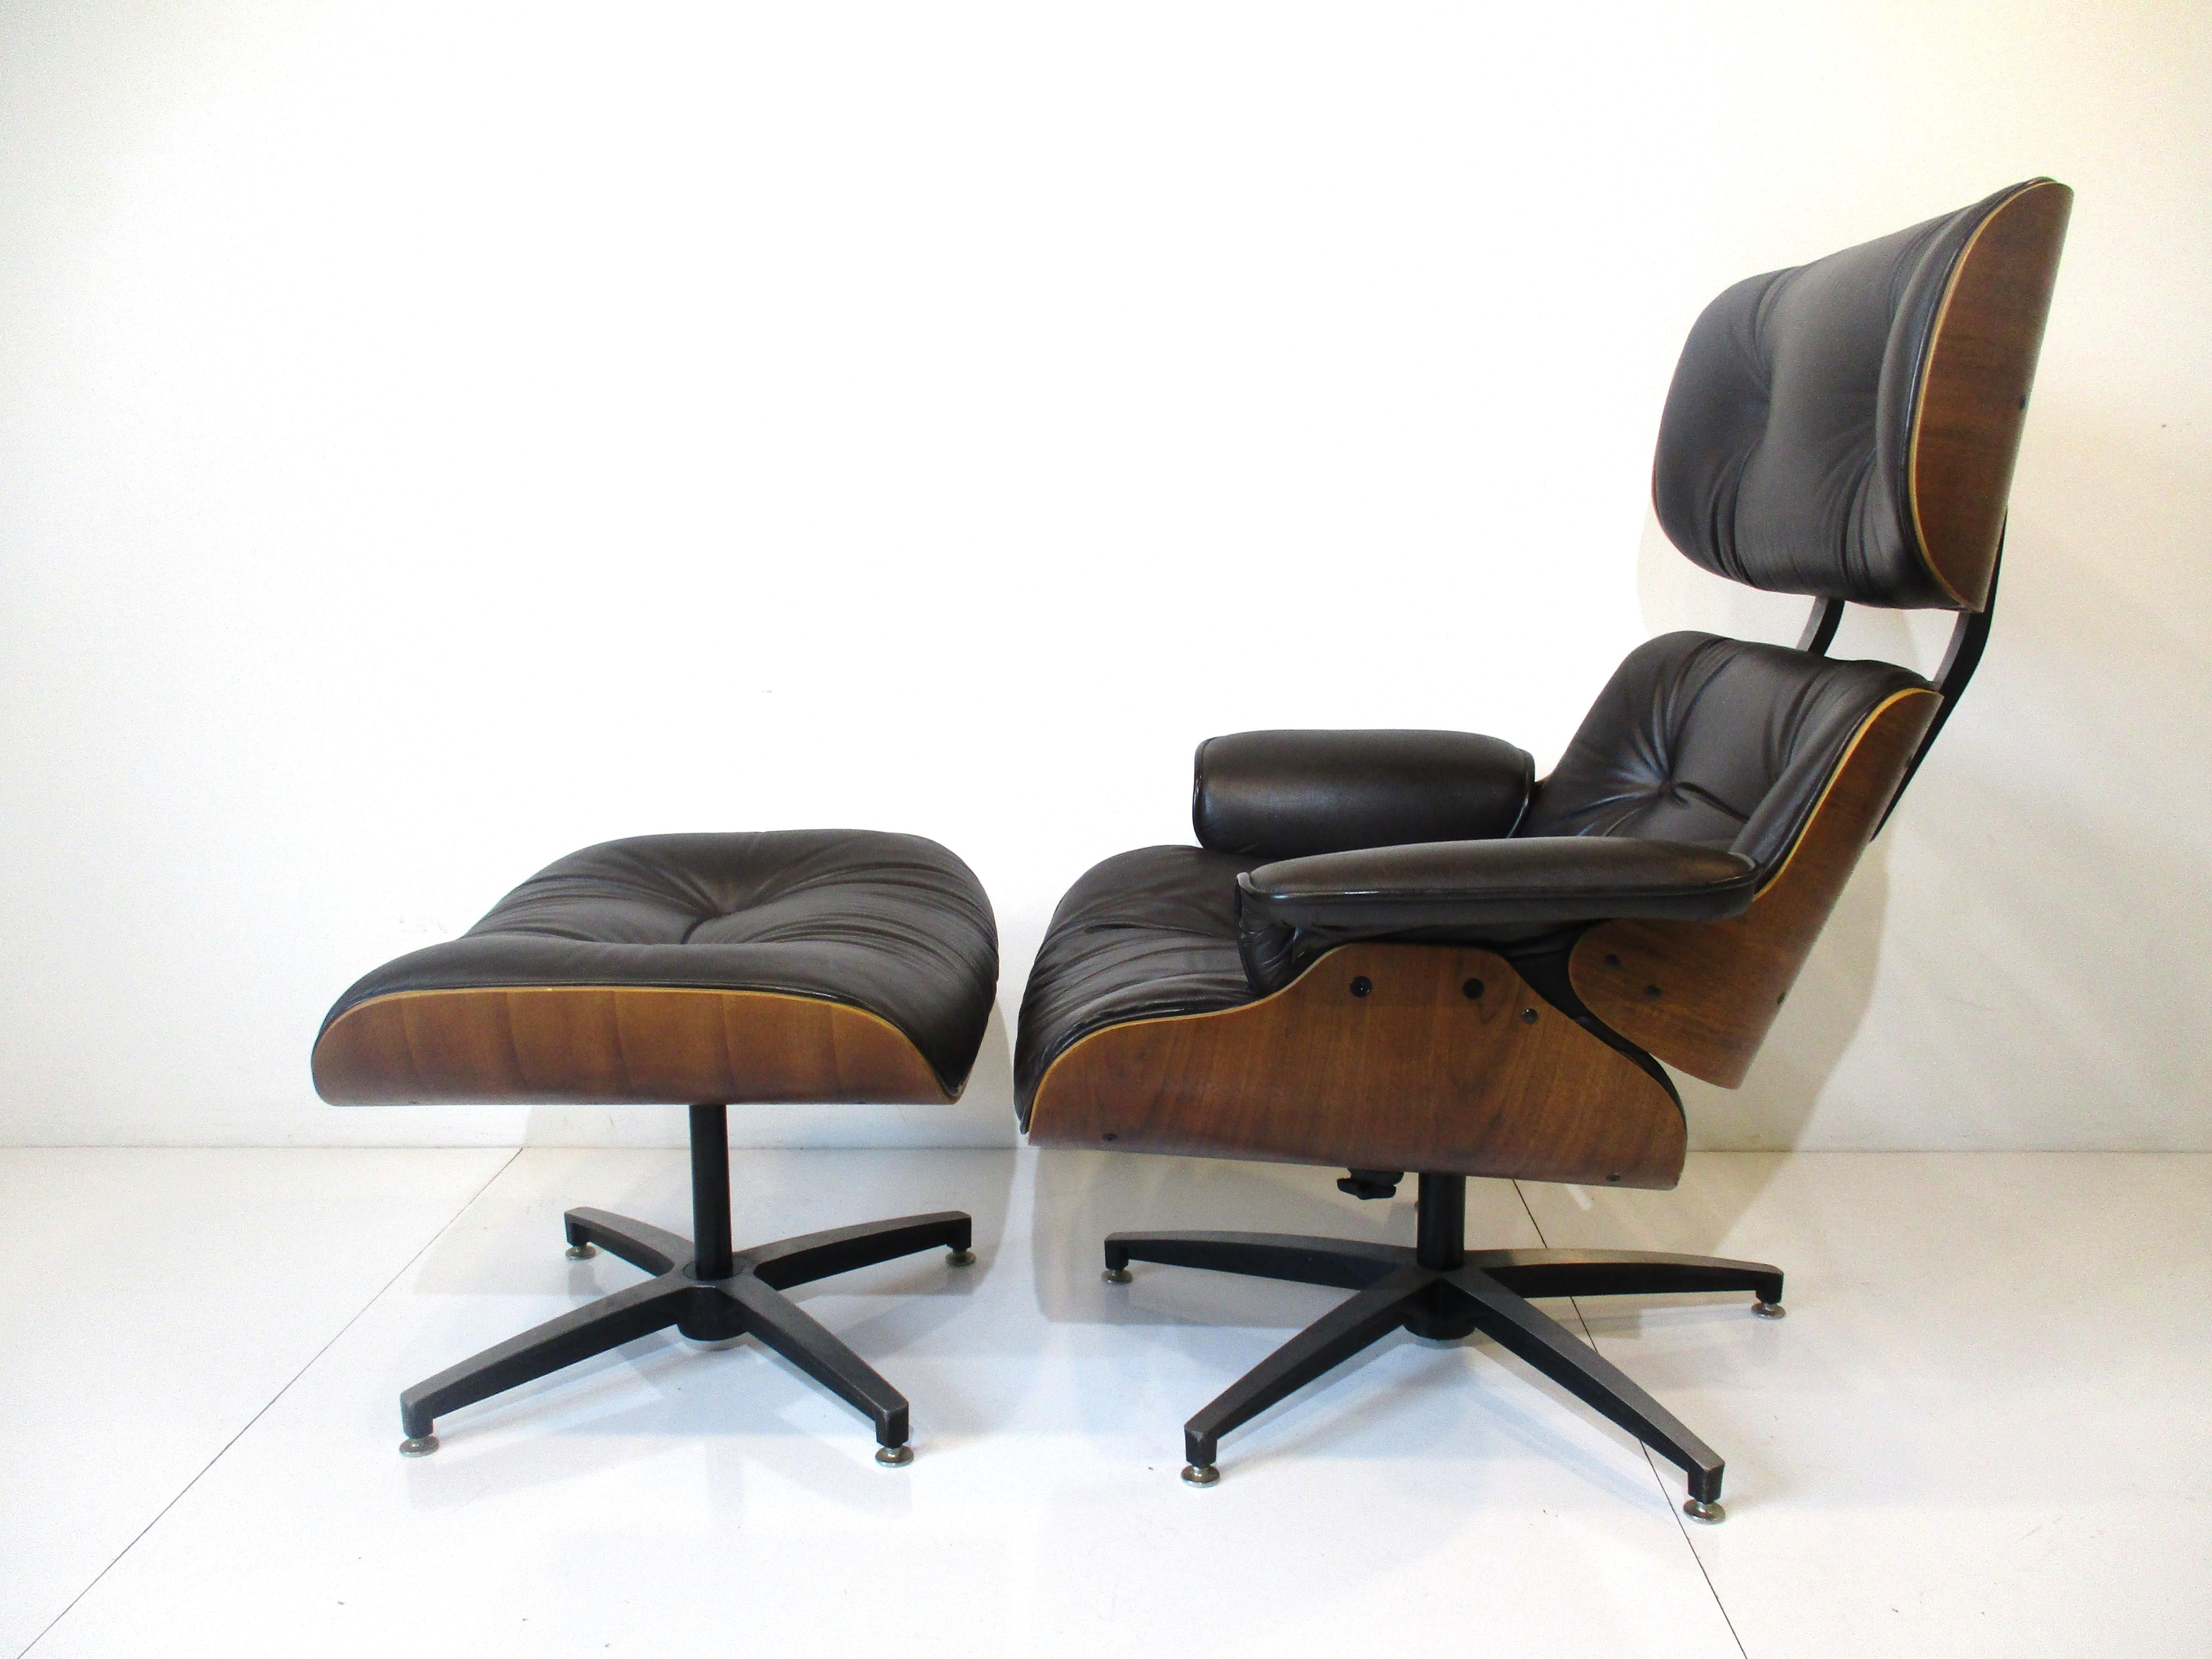 Selig Lounge Chair W/ Ottoman in Chocolate Leather in the Style of Eames 7